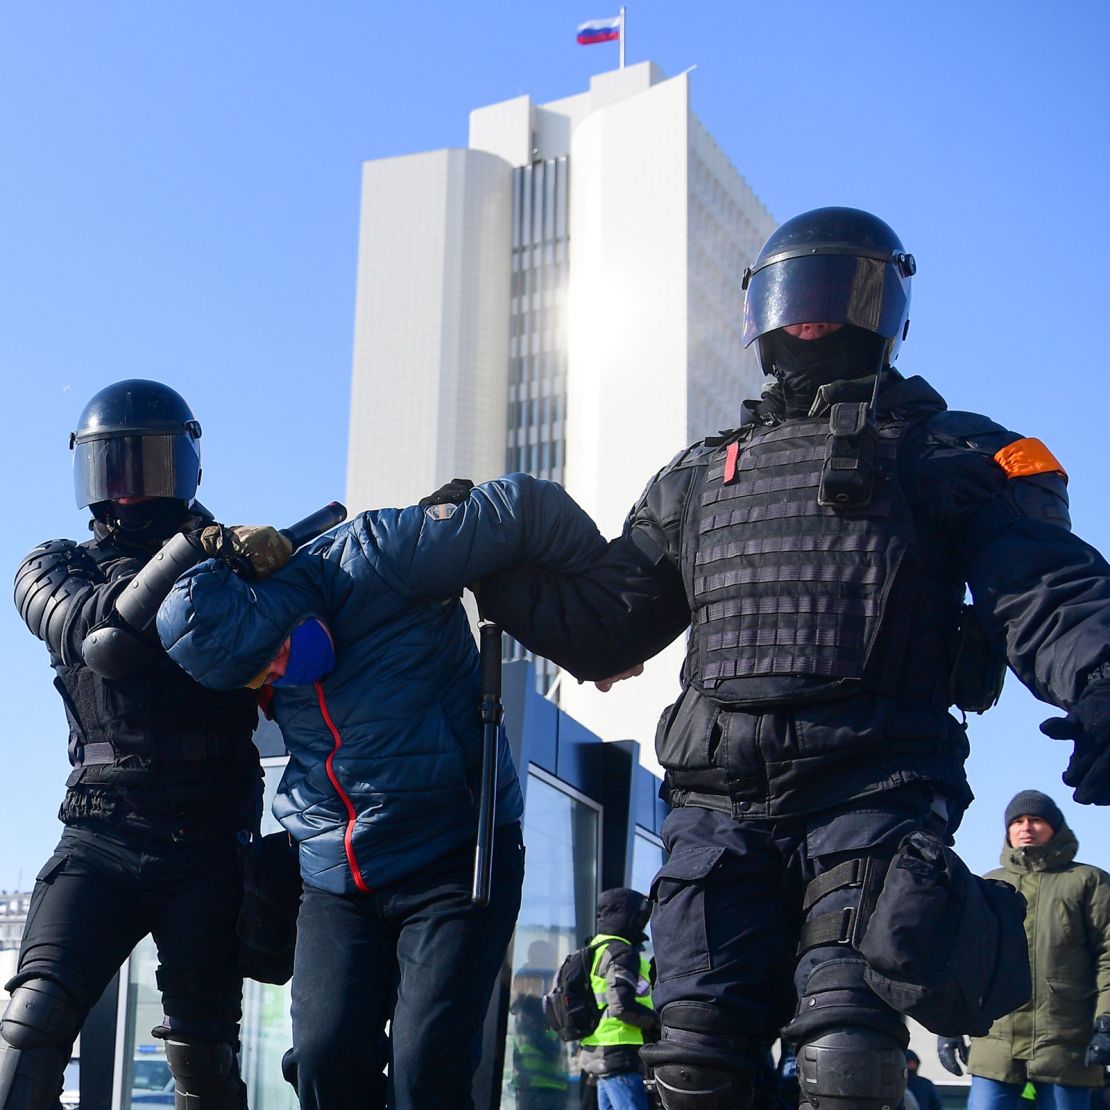 Riot police detain a man during a rally in support of jailed opposition leader Alexey Navalny in the far eastern city of Vladivostok on Sunday.